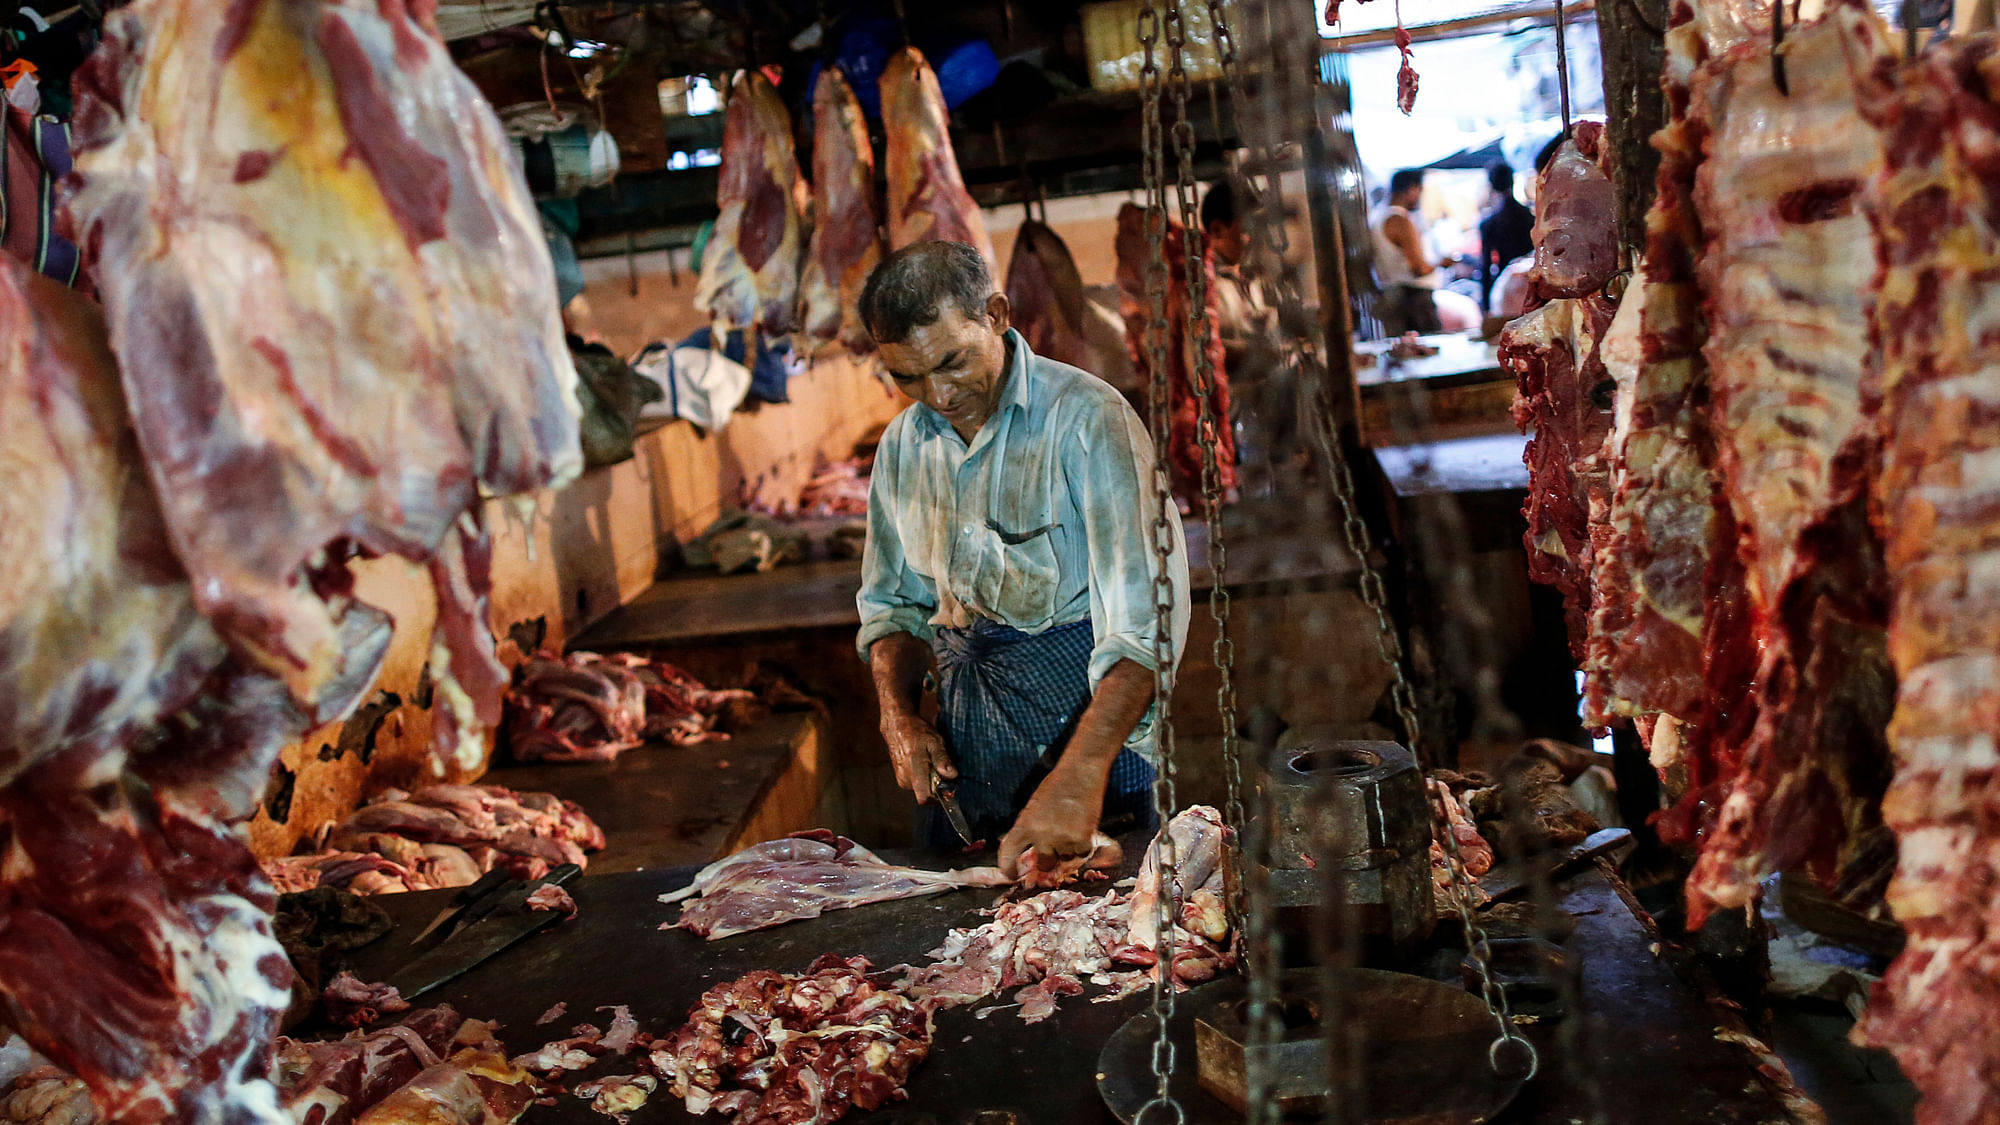 A butcher cuts up portions of beef for sale in an abattoir at a wholesale market in Mumbai, May 11, 2014 (Photo: Reuters) 